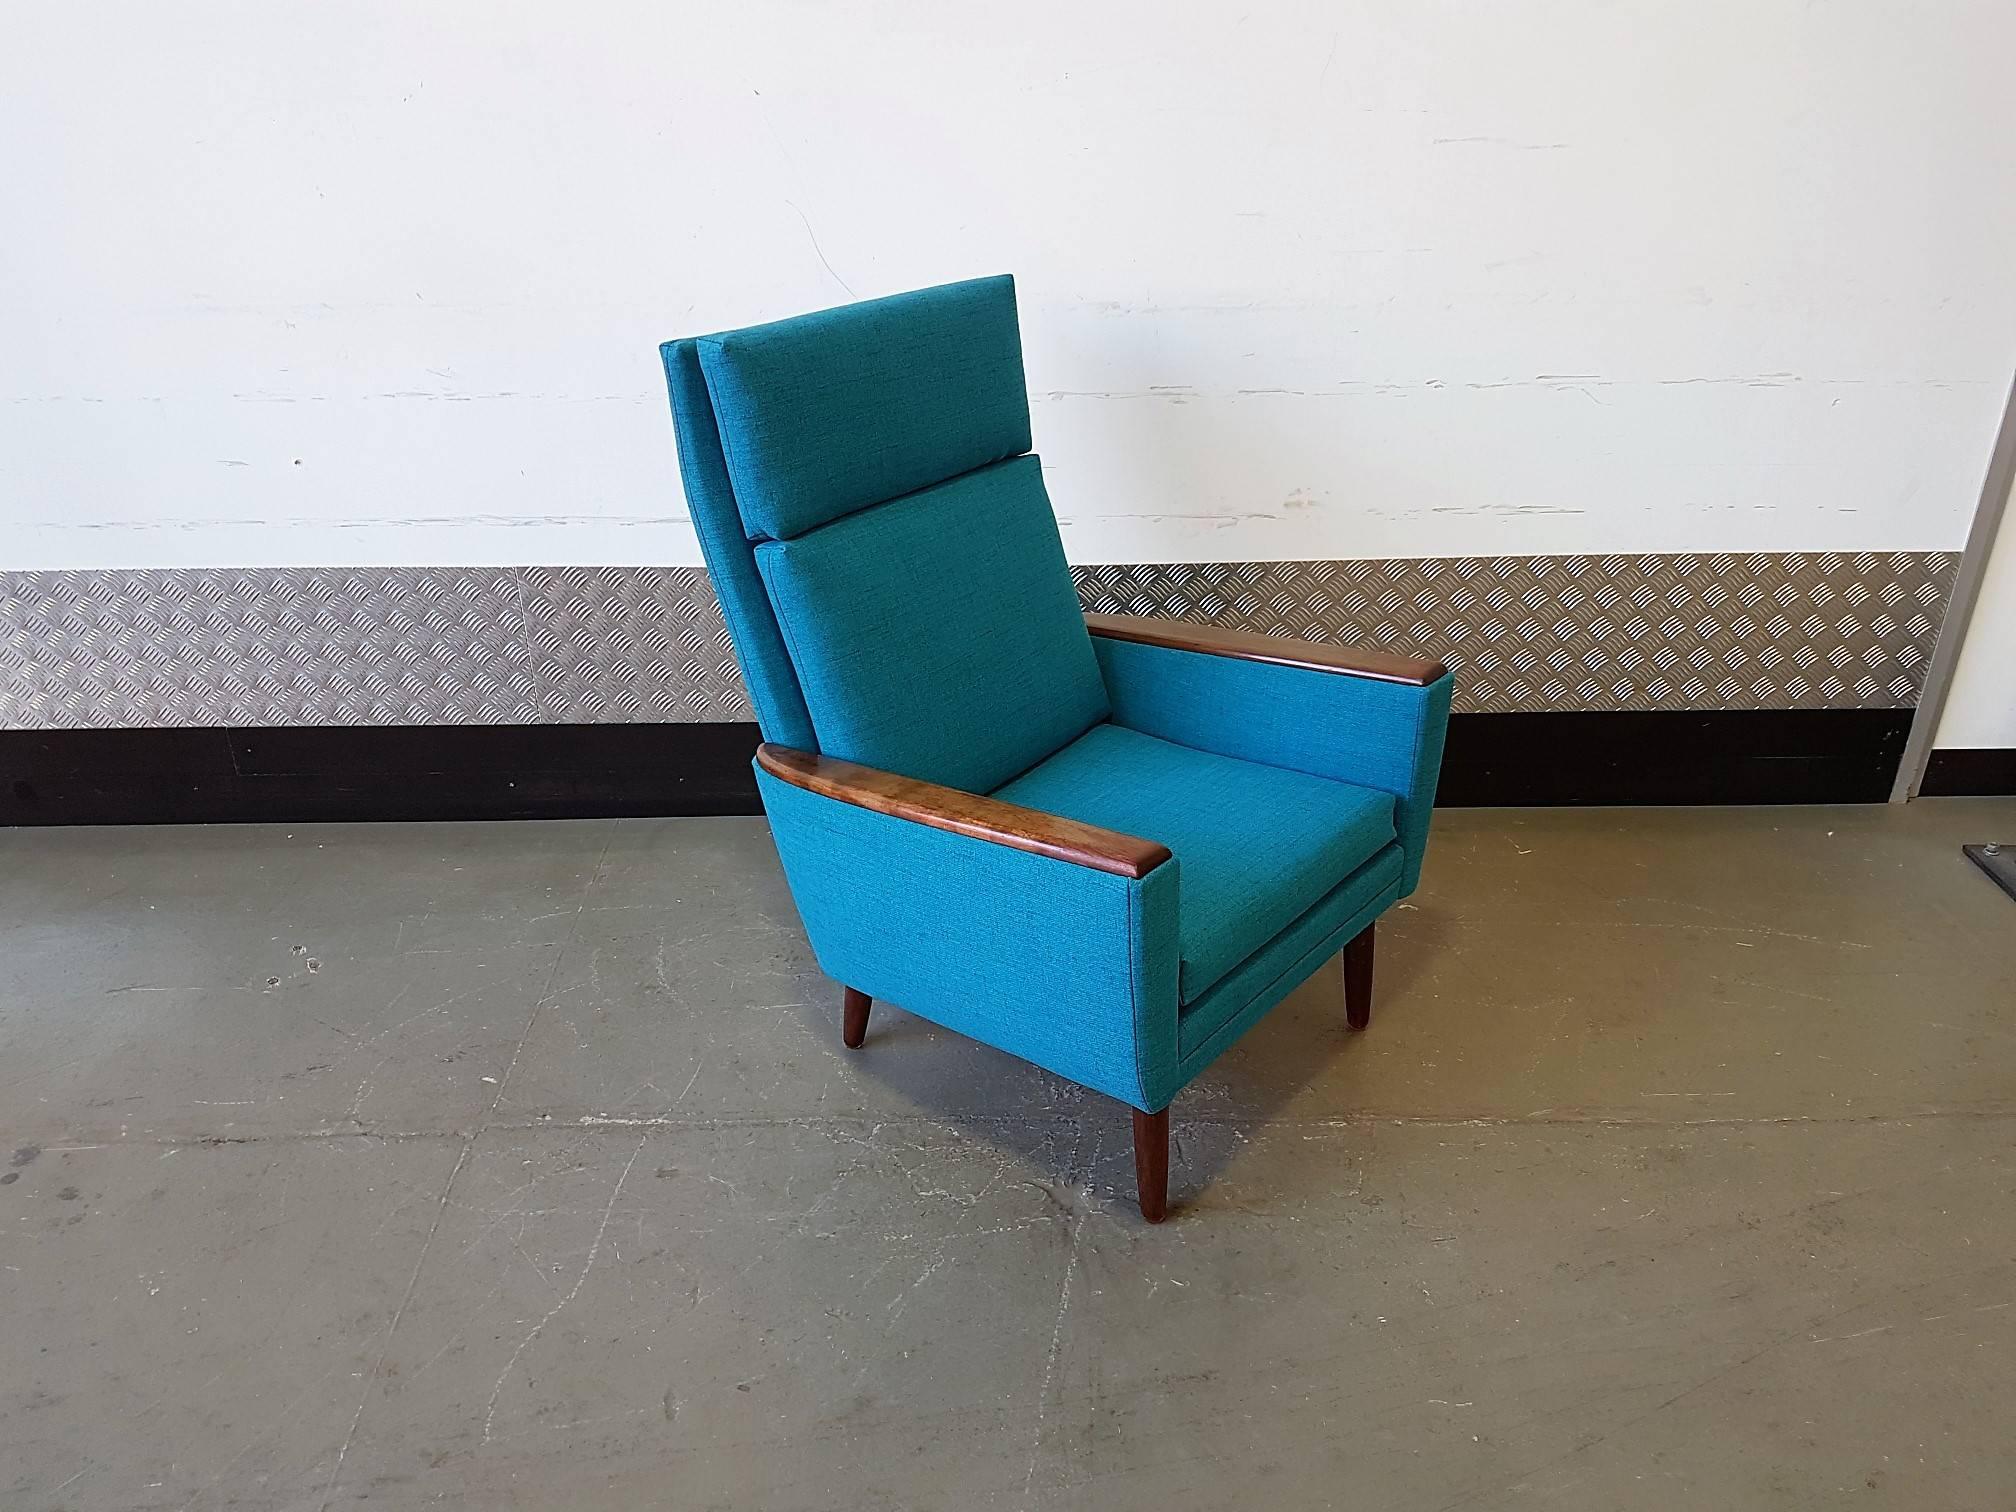 Danish high back armchair from 1960s went through a restoration process. Chair has been stripped down, new insides, new upholstery, cushions come with zips for easy maintenance. Wood is in excellent condition.

Fabrics used are the highest